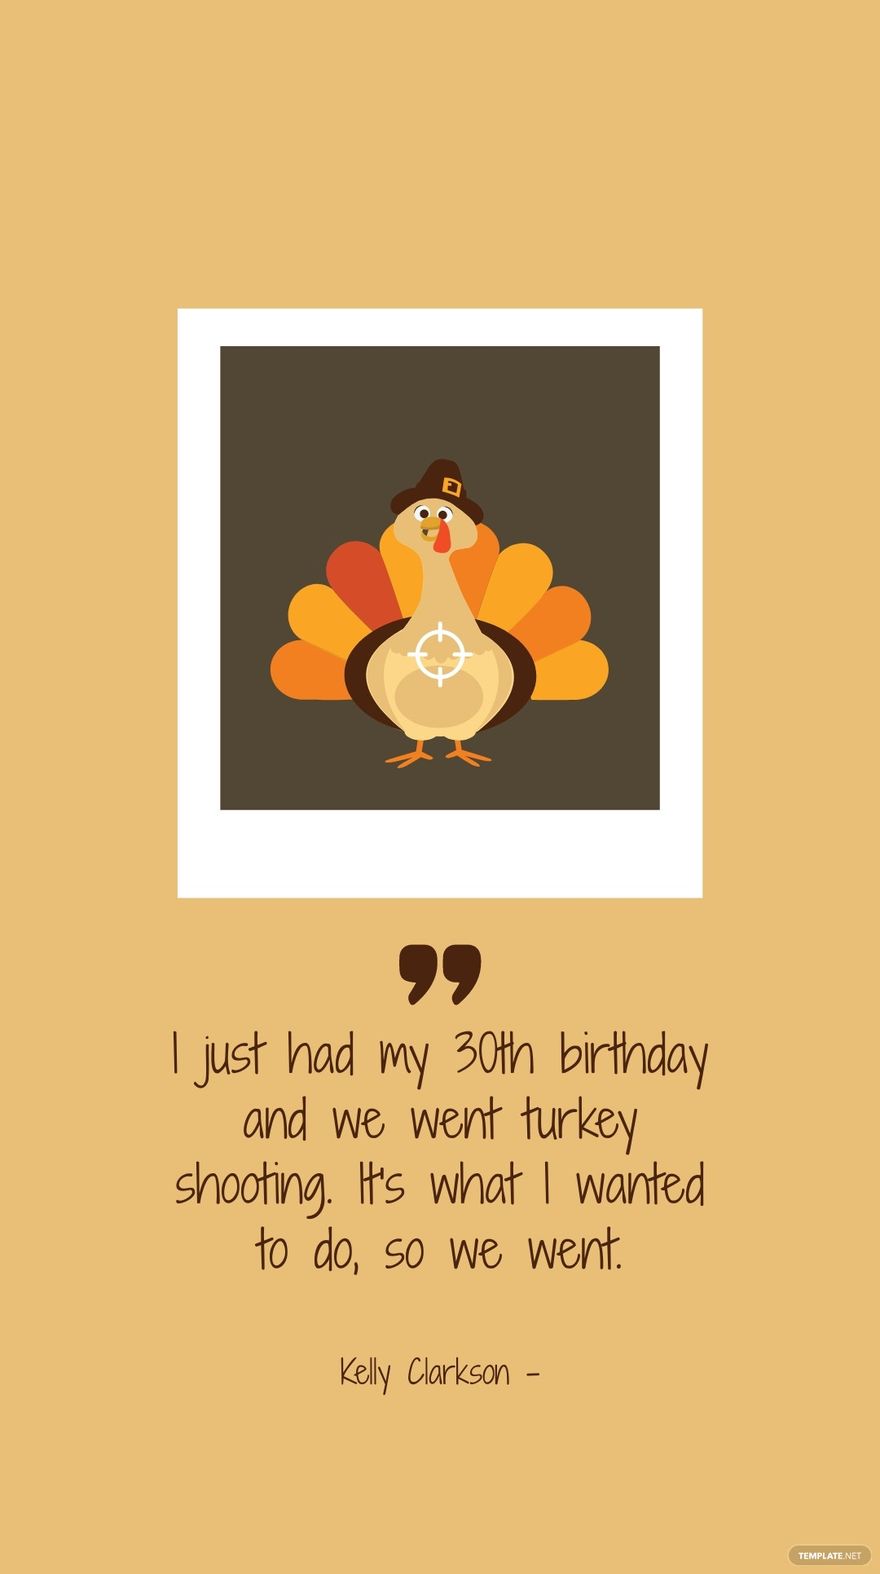 Free Kelly Clarkson - I just had my 30th birthday and we went turkey shooting. It's what I wanted to do, so we went.